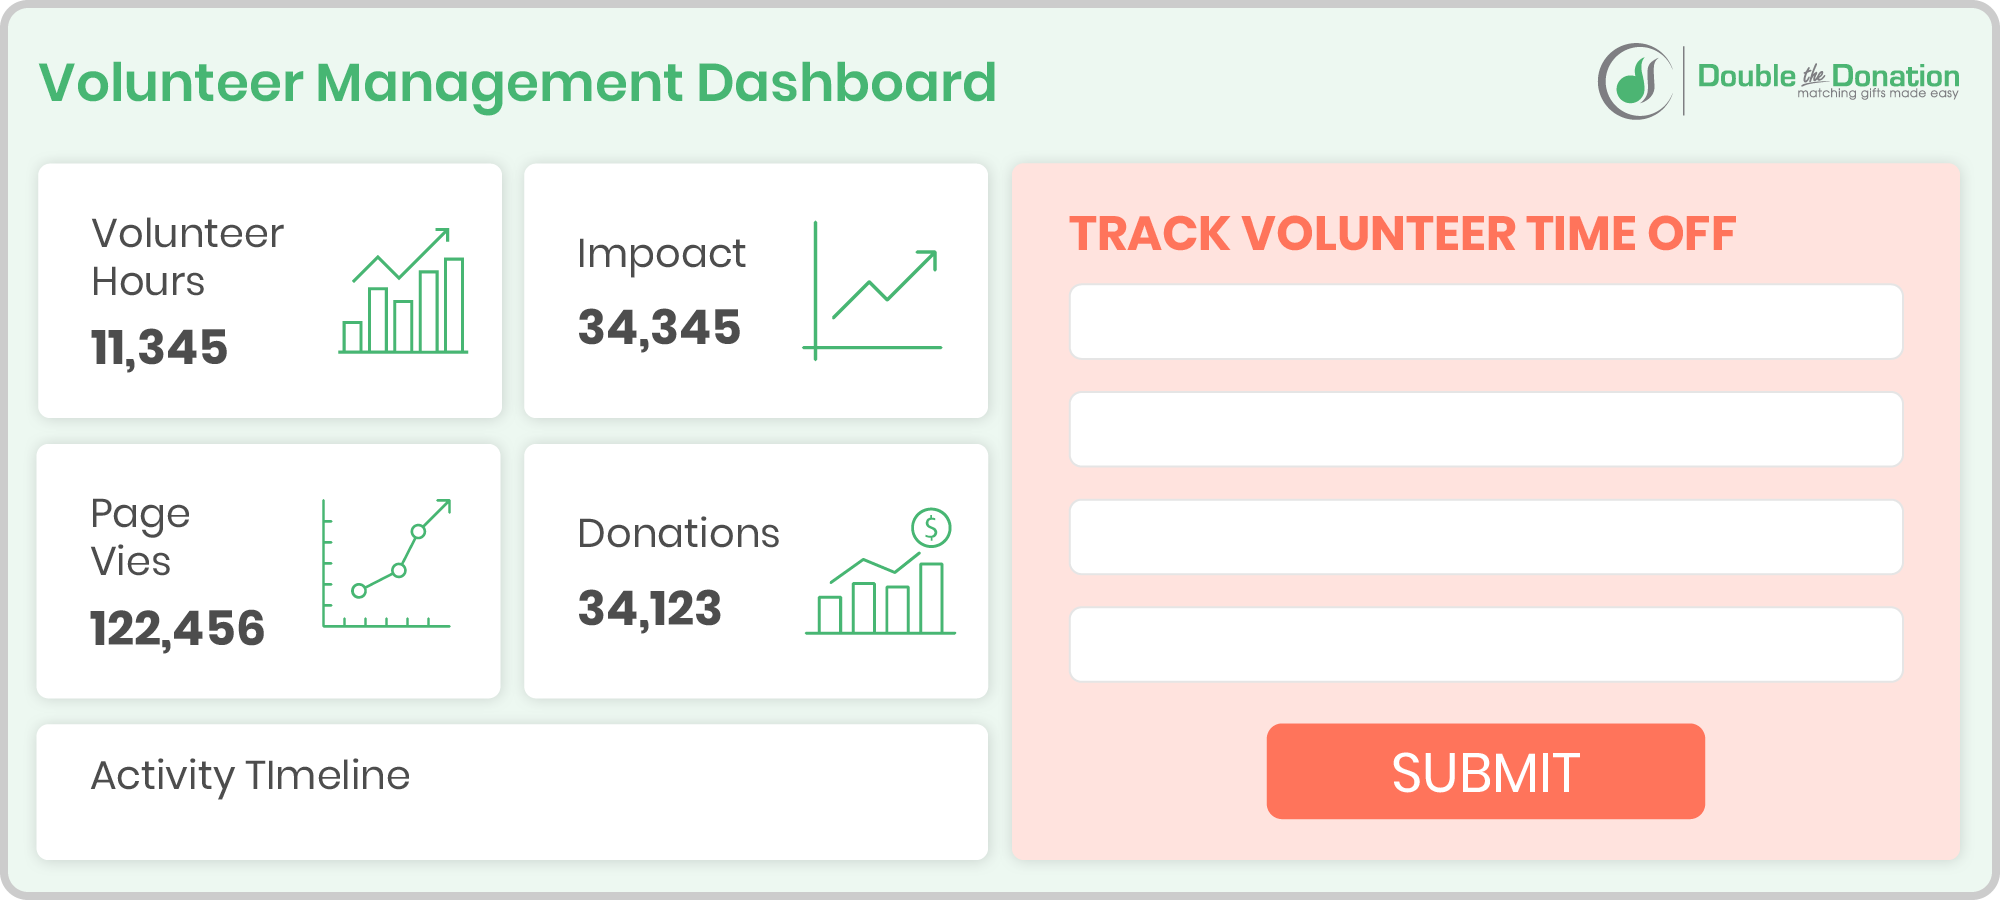 Tracking Volunteer Time Off with a VMS